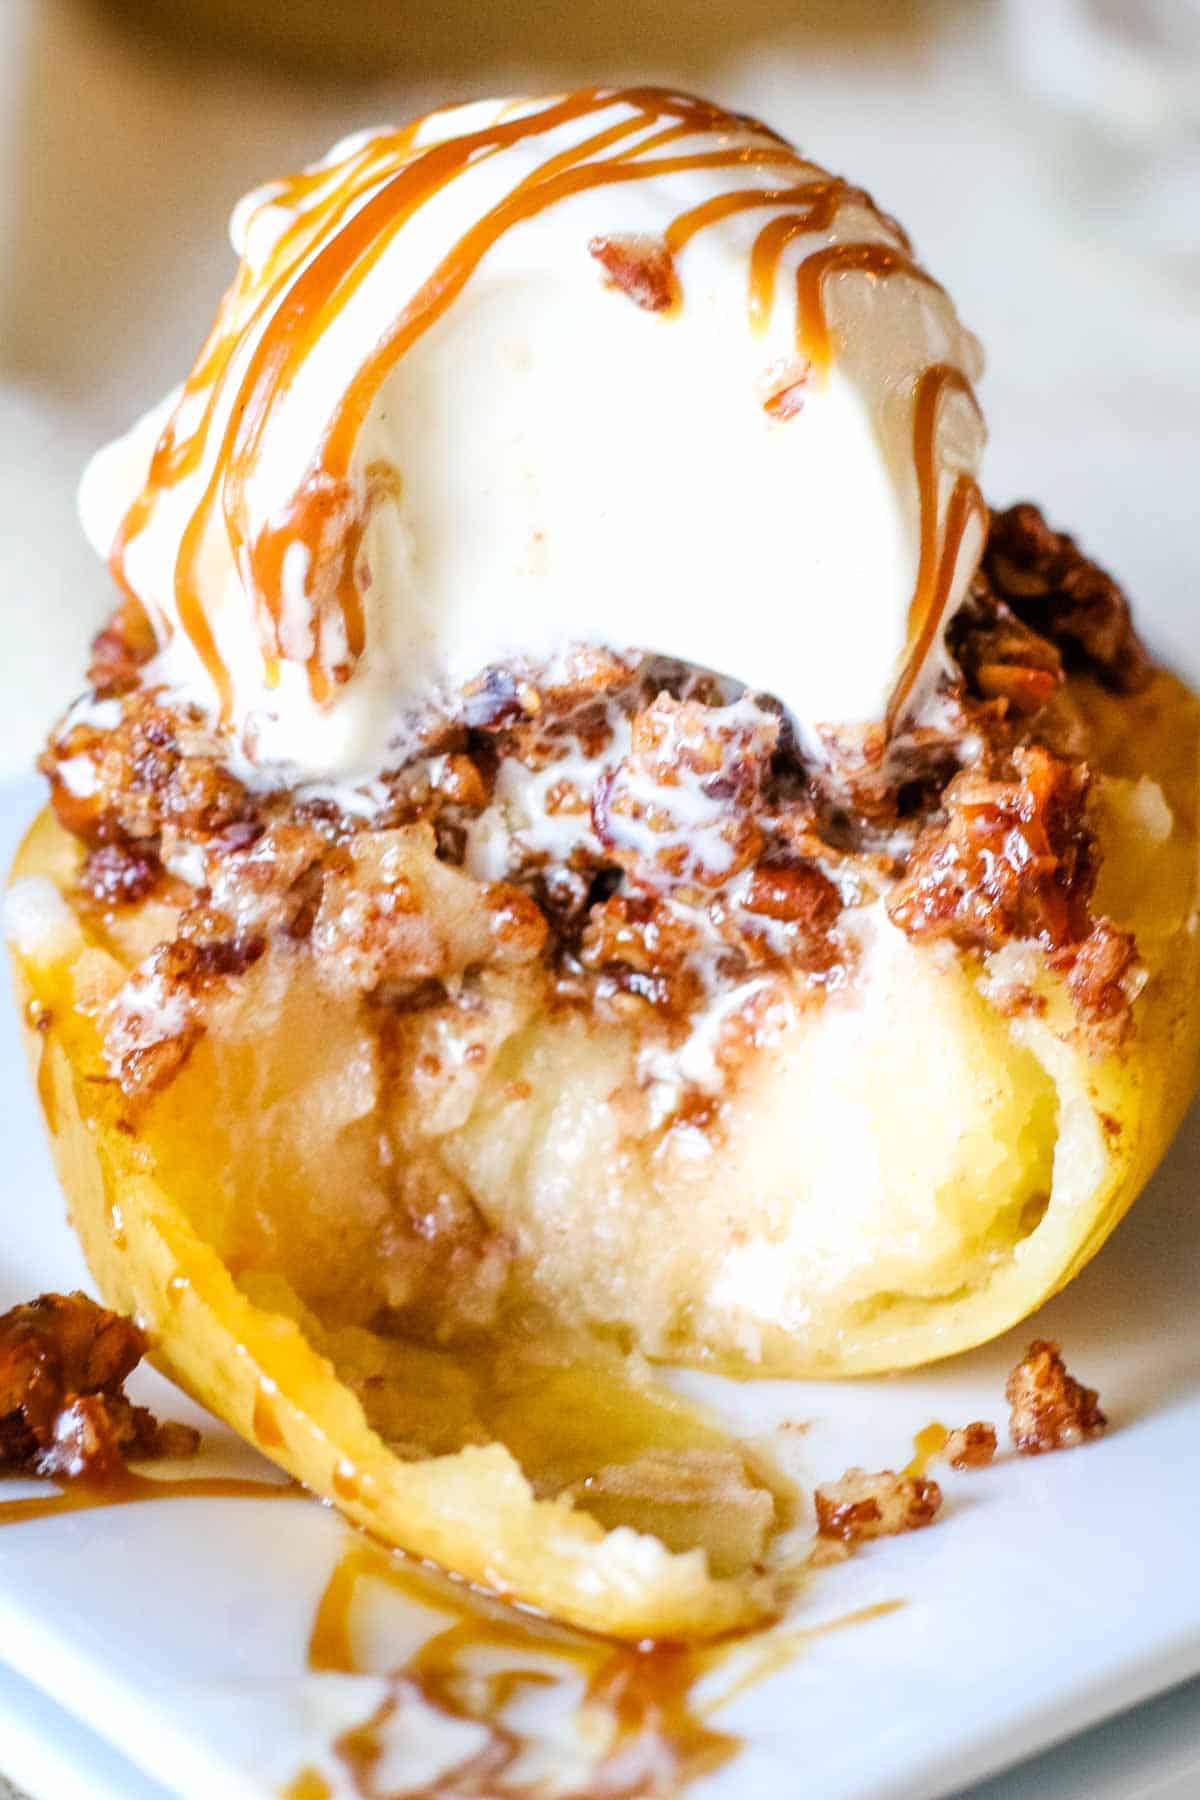 baked apple with ice cream and caramel drizzle.